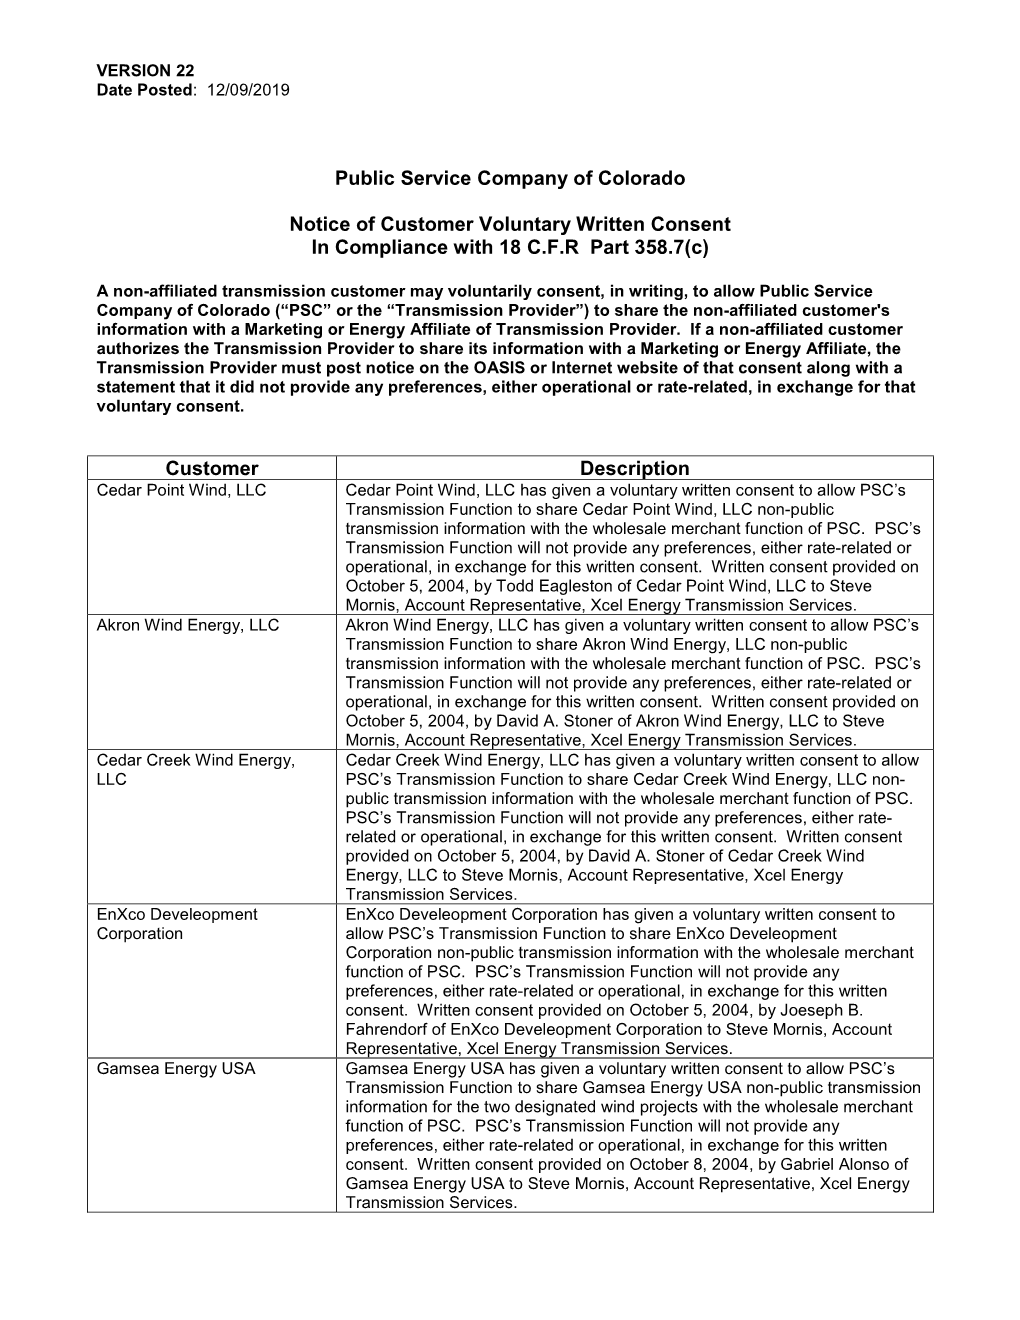 Public Service Company of Colorado Notice of Customer Voluntary Written Consent in Compliance with 18 C.F.R Part 358.7(C) Custo